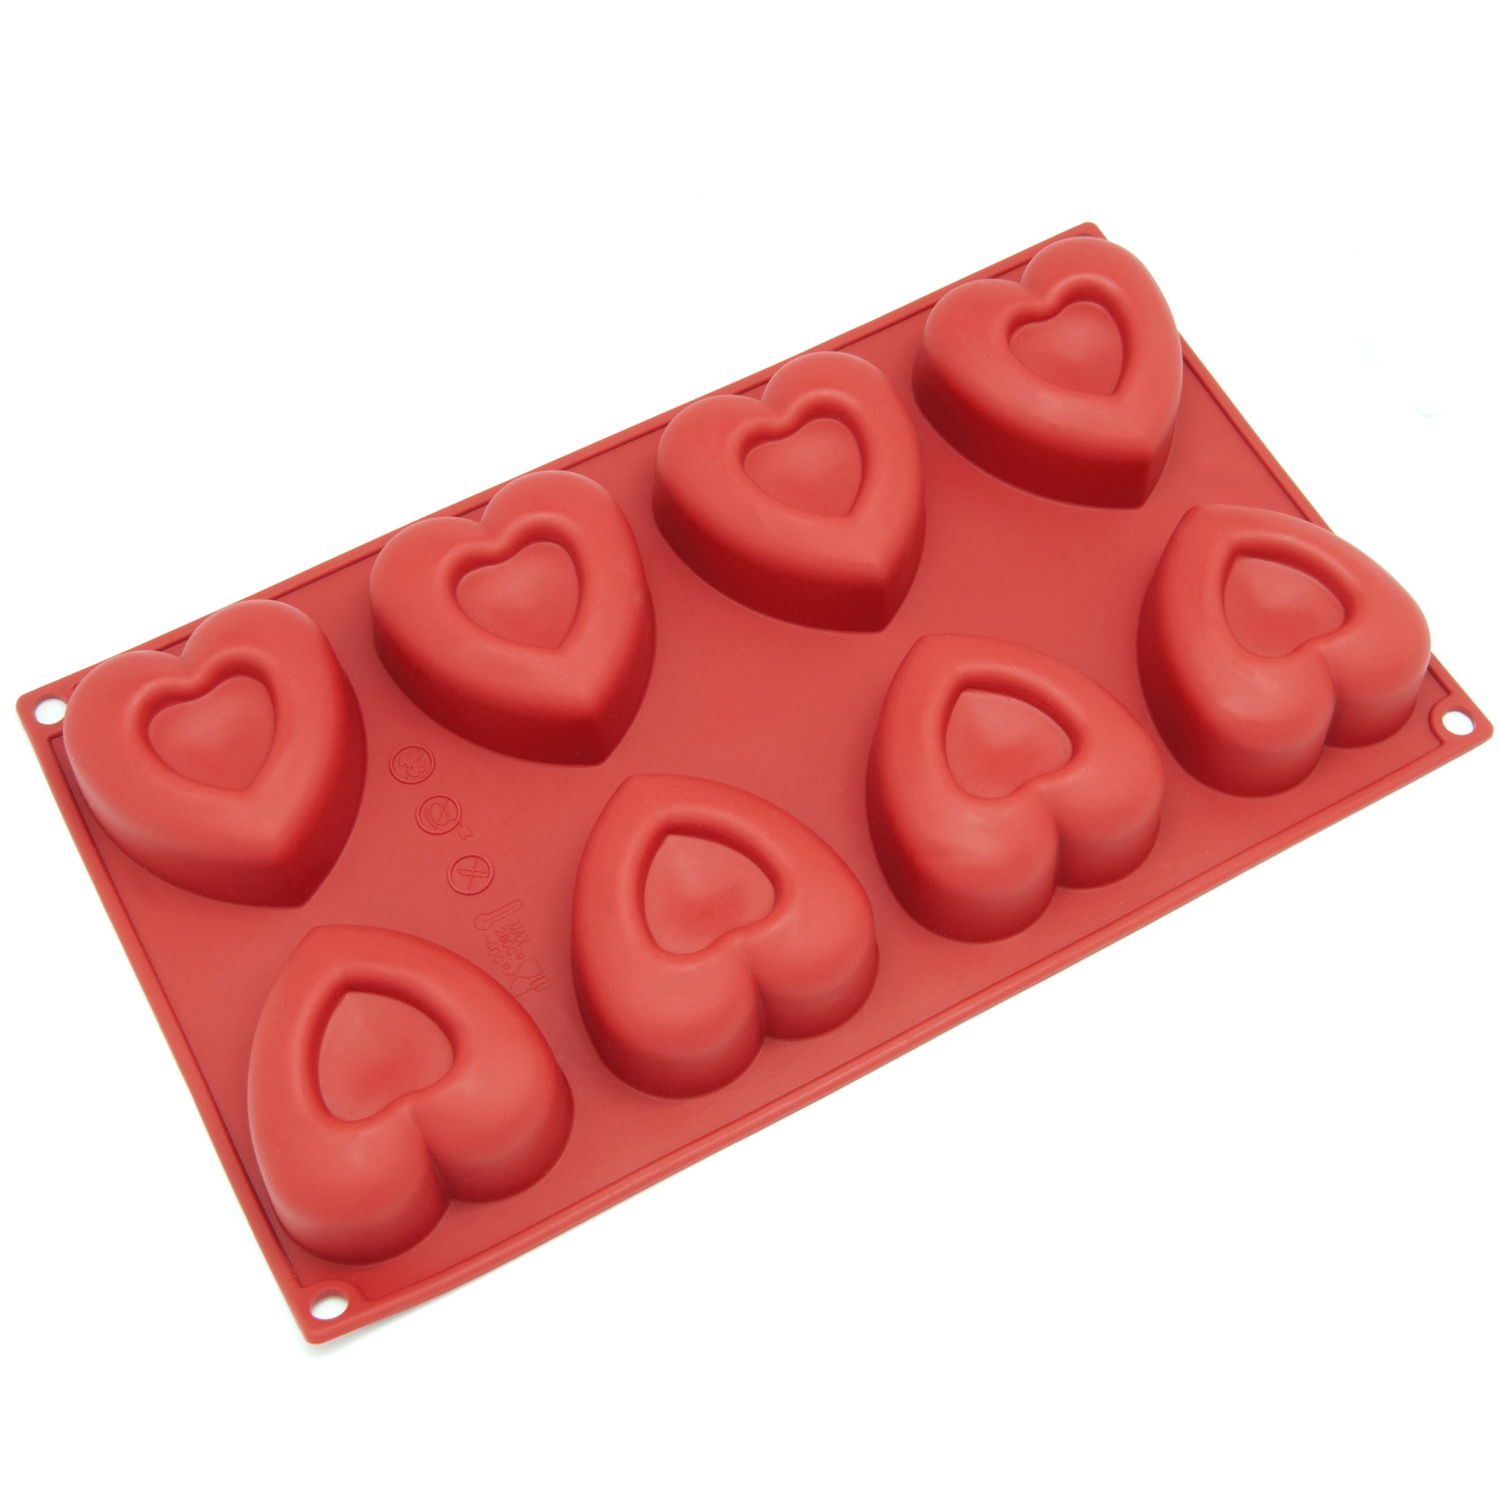 Freshware Silicone Mold, Soap Mold for Cupcake, Muffin, Pudding, Cheesecake, and Soap, Valentine Heart, 8-Cavity